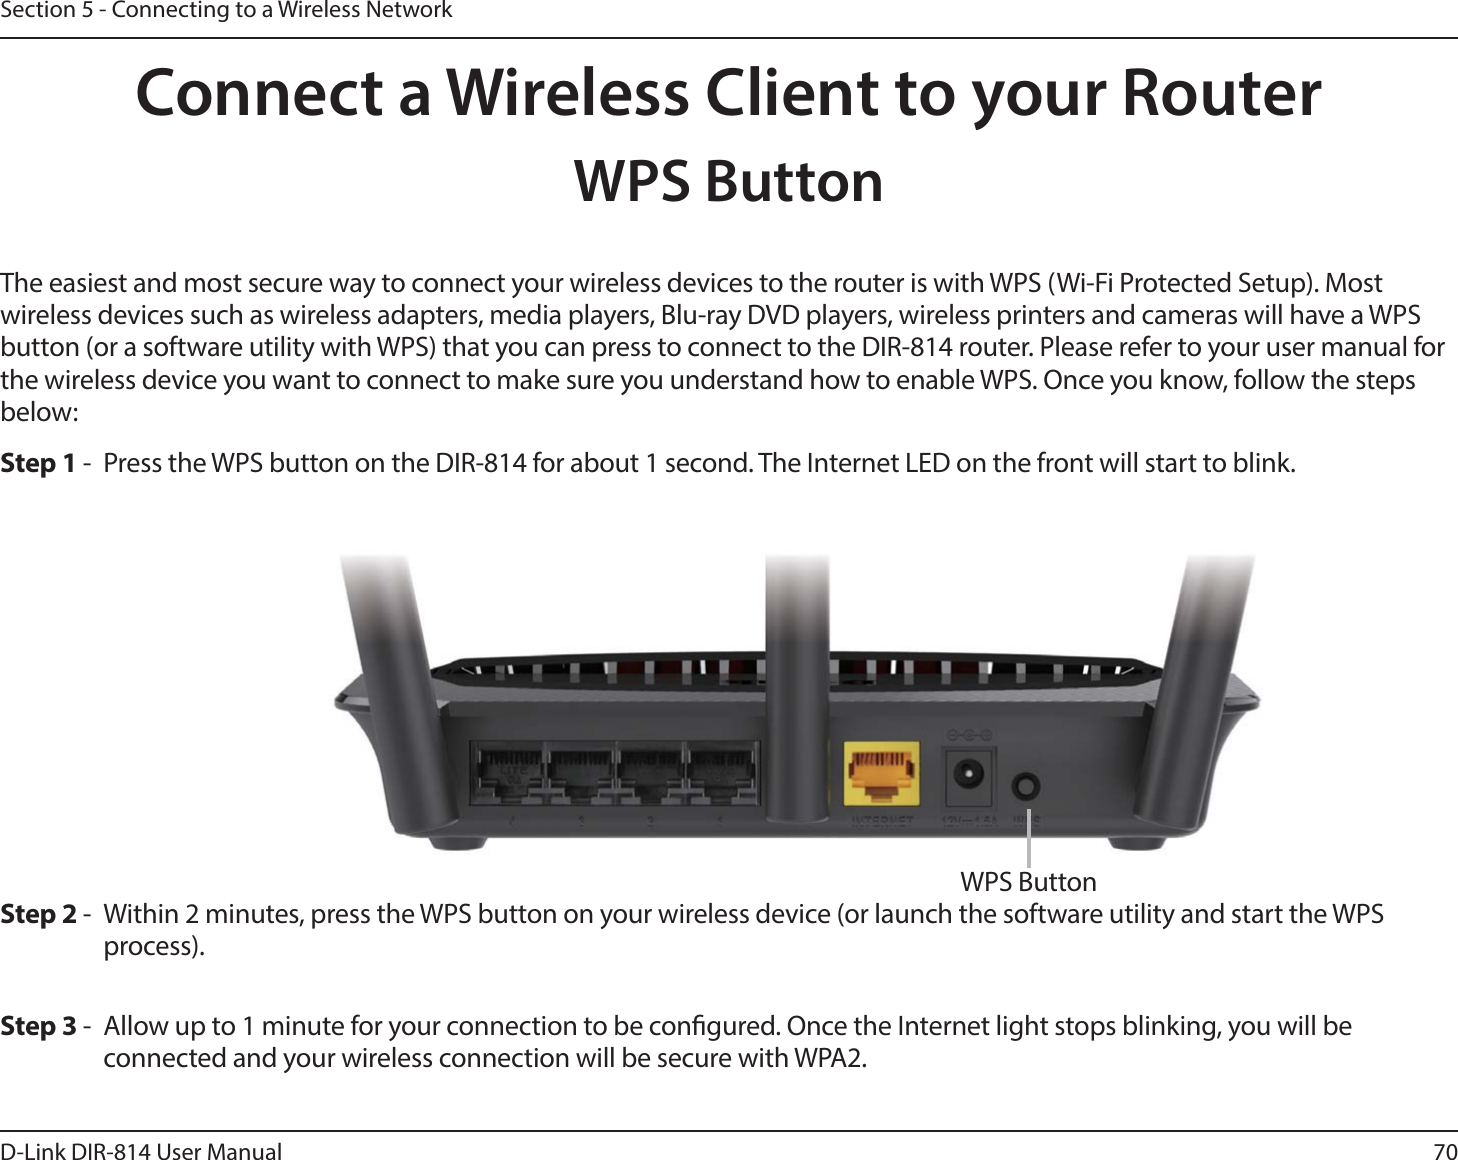 70D-Link DIR-814 User ManualSection 5 - Connecting to a Wireless NetworkConnect a Wireless Client to your RouterWPS ButtonStep 2 -  Within 2 minutes, press the WPS button on your wireless device (or launch the software utility and start the WPS process).The easiest and most secure way to connect your wireless devices to the router is with WPS (Wi-Fi Protected Setup). Most wireless devices such as wireless adapters, media players, Blu-ray DVD players, wireless printers and cameras will have a WPS button (or a software utility with WPS) that you can press to connect to the DIR-814 router. Please refer to your user manual for the wireless device you want to connect to make sure you understand how to enable WPS. Once you know, follow the steps below:Step 1 -  Press the WPS button on the DIR-814 for about 1 second. The Internet LED on the front will start to blink.Step 3 -  Allow up to 1 minute for your connection to be congured. Once the Internet light stops blinking, you will be connected and your wireless connection will be secure with WPA2.WPS Button